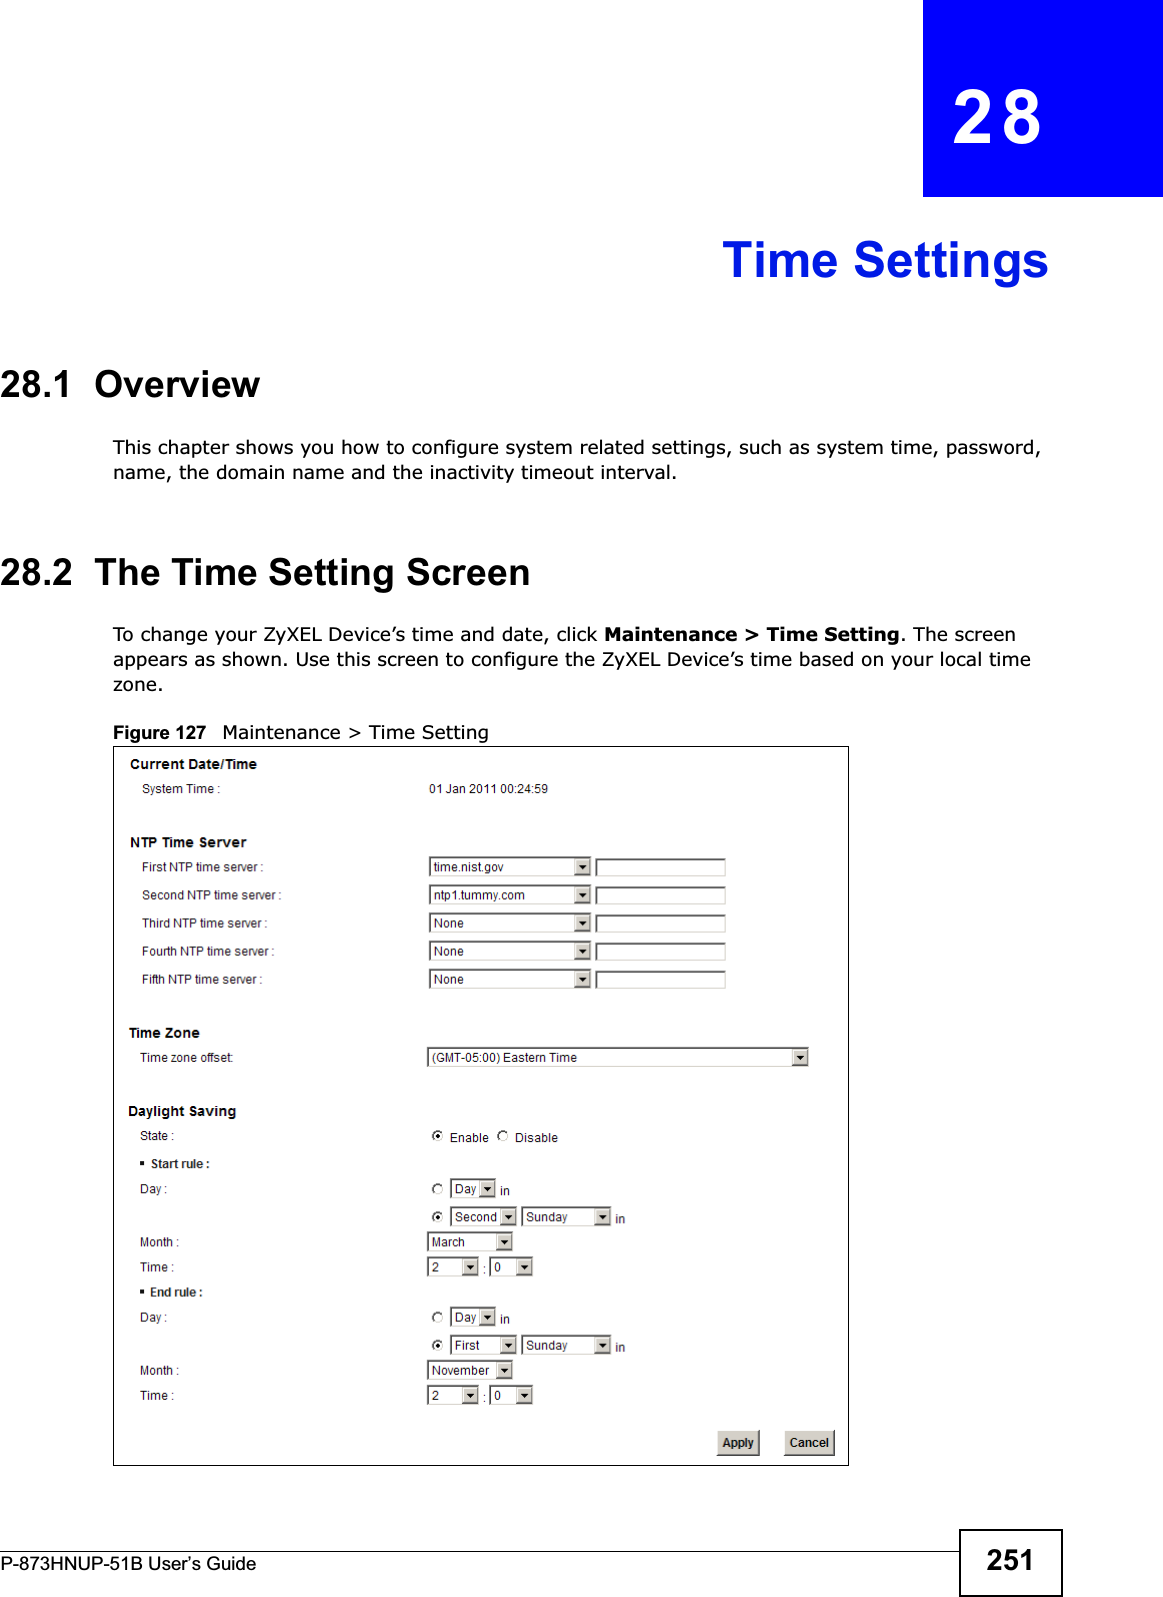 P-873HNUP-51B User’s Guide 251CHAPTER   28Time Settings28.1  OverviewThis chapter shows you how to configure system related settings, such as system time, password, name, the domain name and the inactivity timeout interval.   28.2  The Time Setting Screen To change your ZyXEL Device’s time and date, click Maintenance &gt; Time Setting. The screen appears as shown. Use this screen to configure the ZyXEL Device’s time based on your local time zone.Figure 127   Maintenance &gt; Time Setting